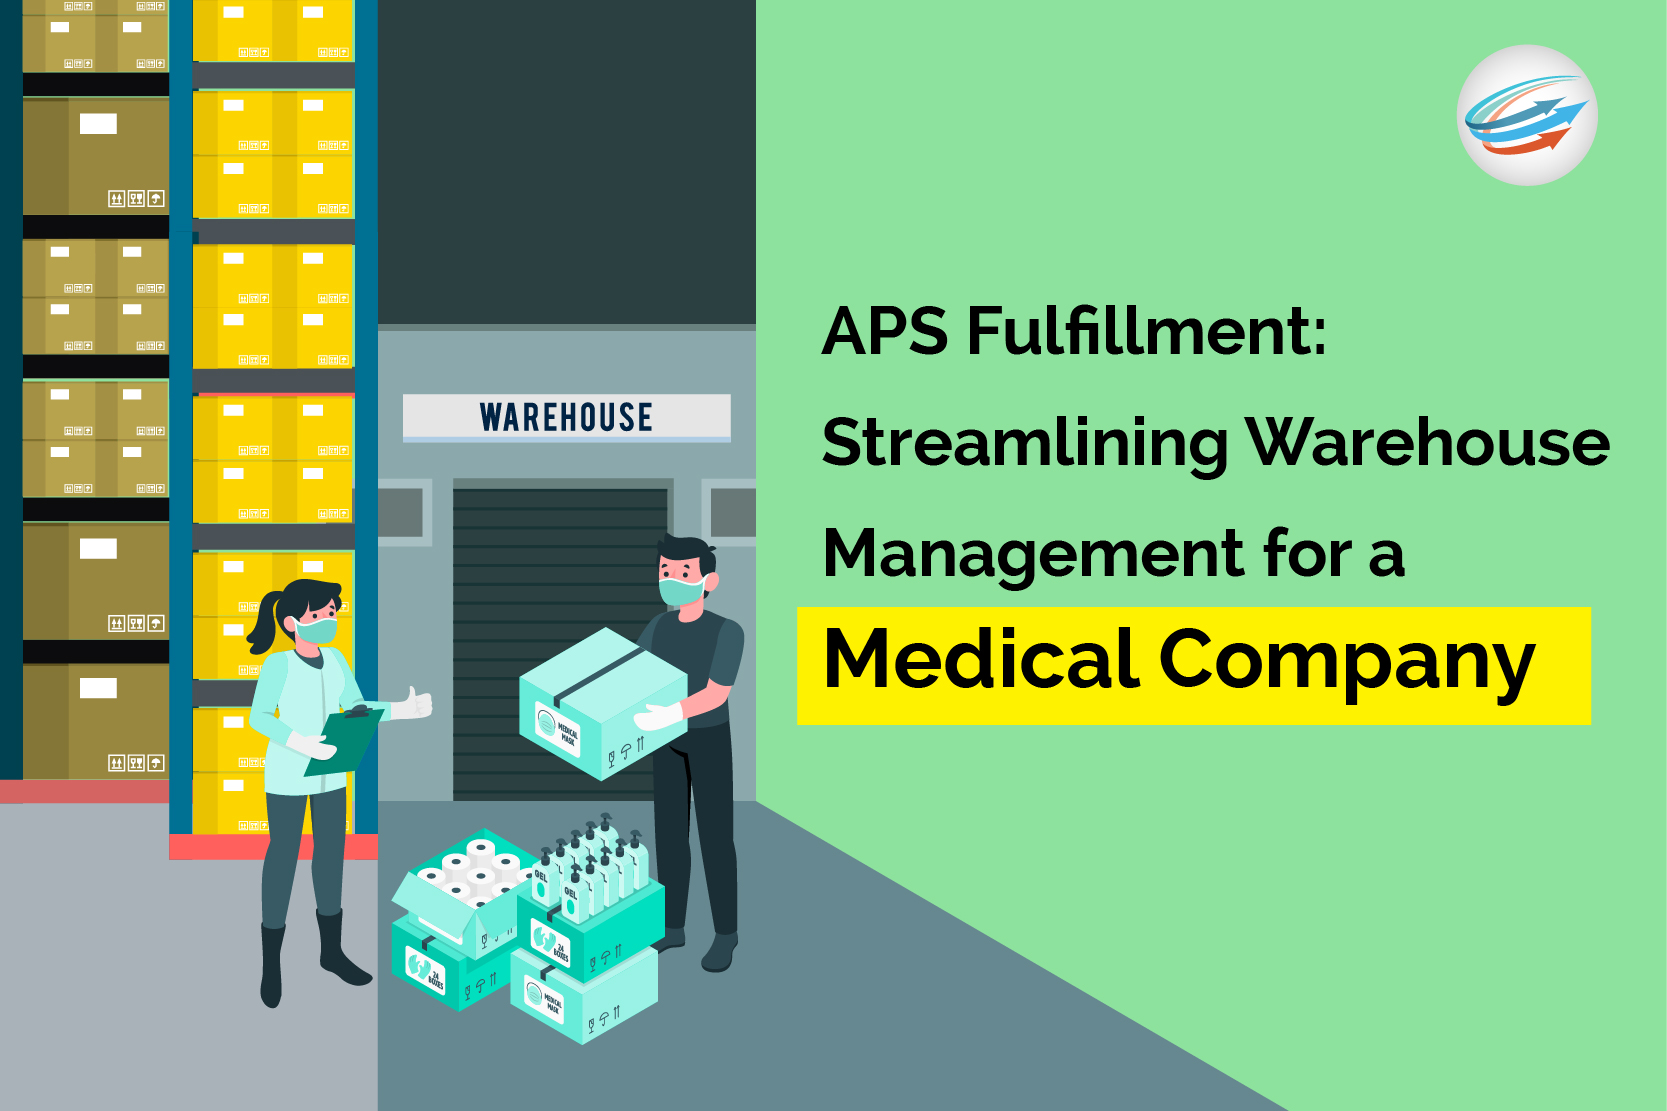 APS Fulfillment: Streamlining Warehouse Management for a Medical Company